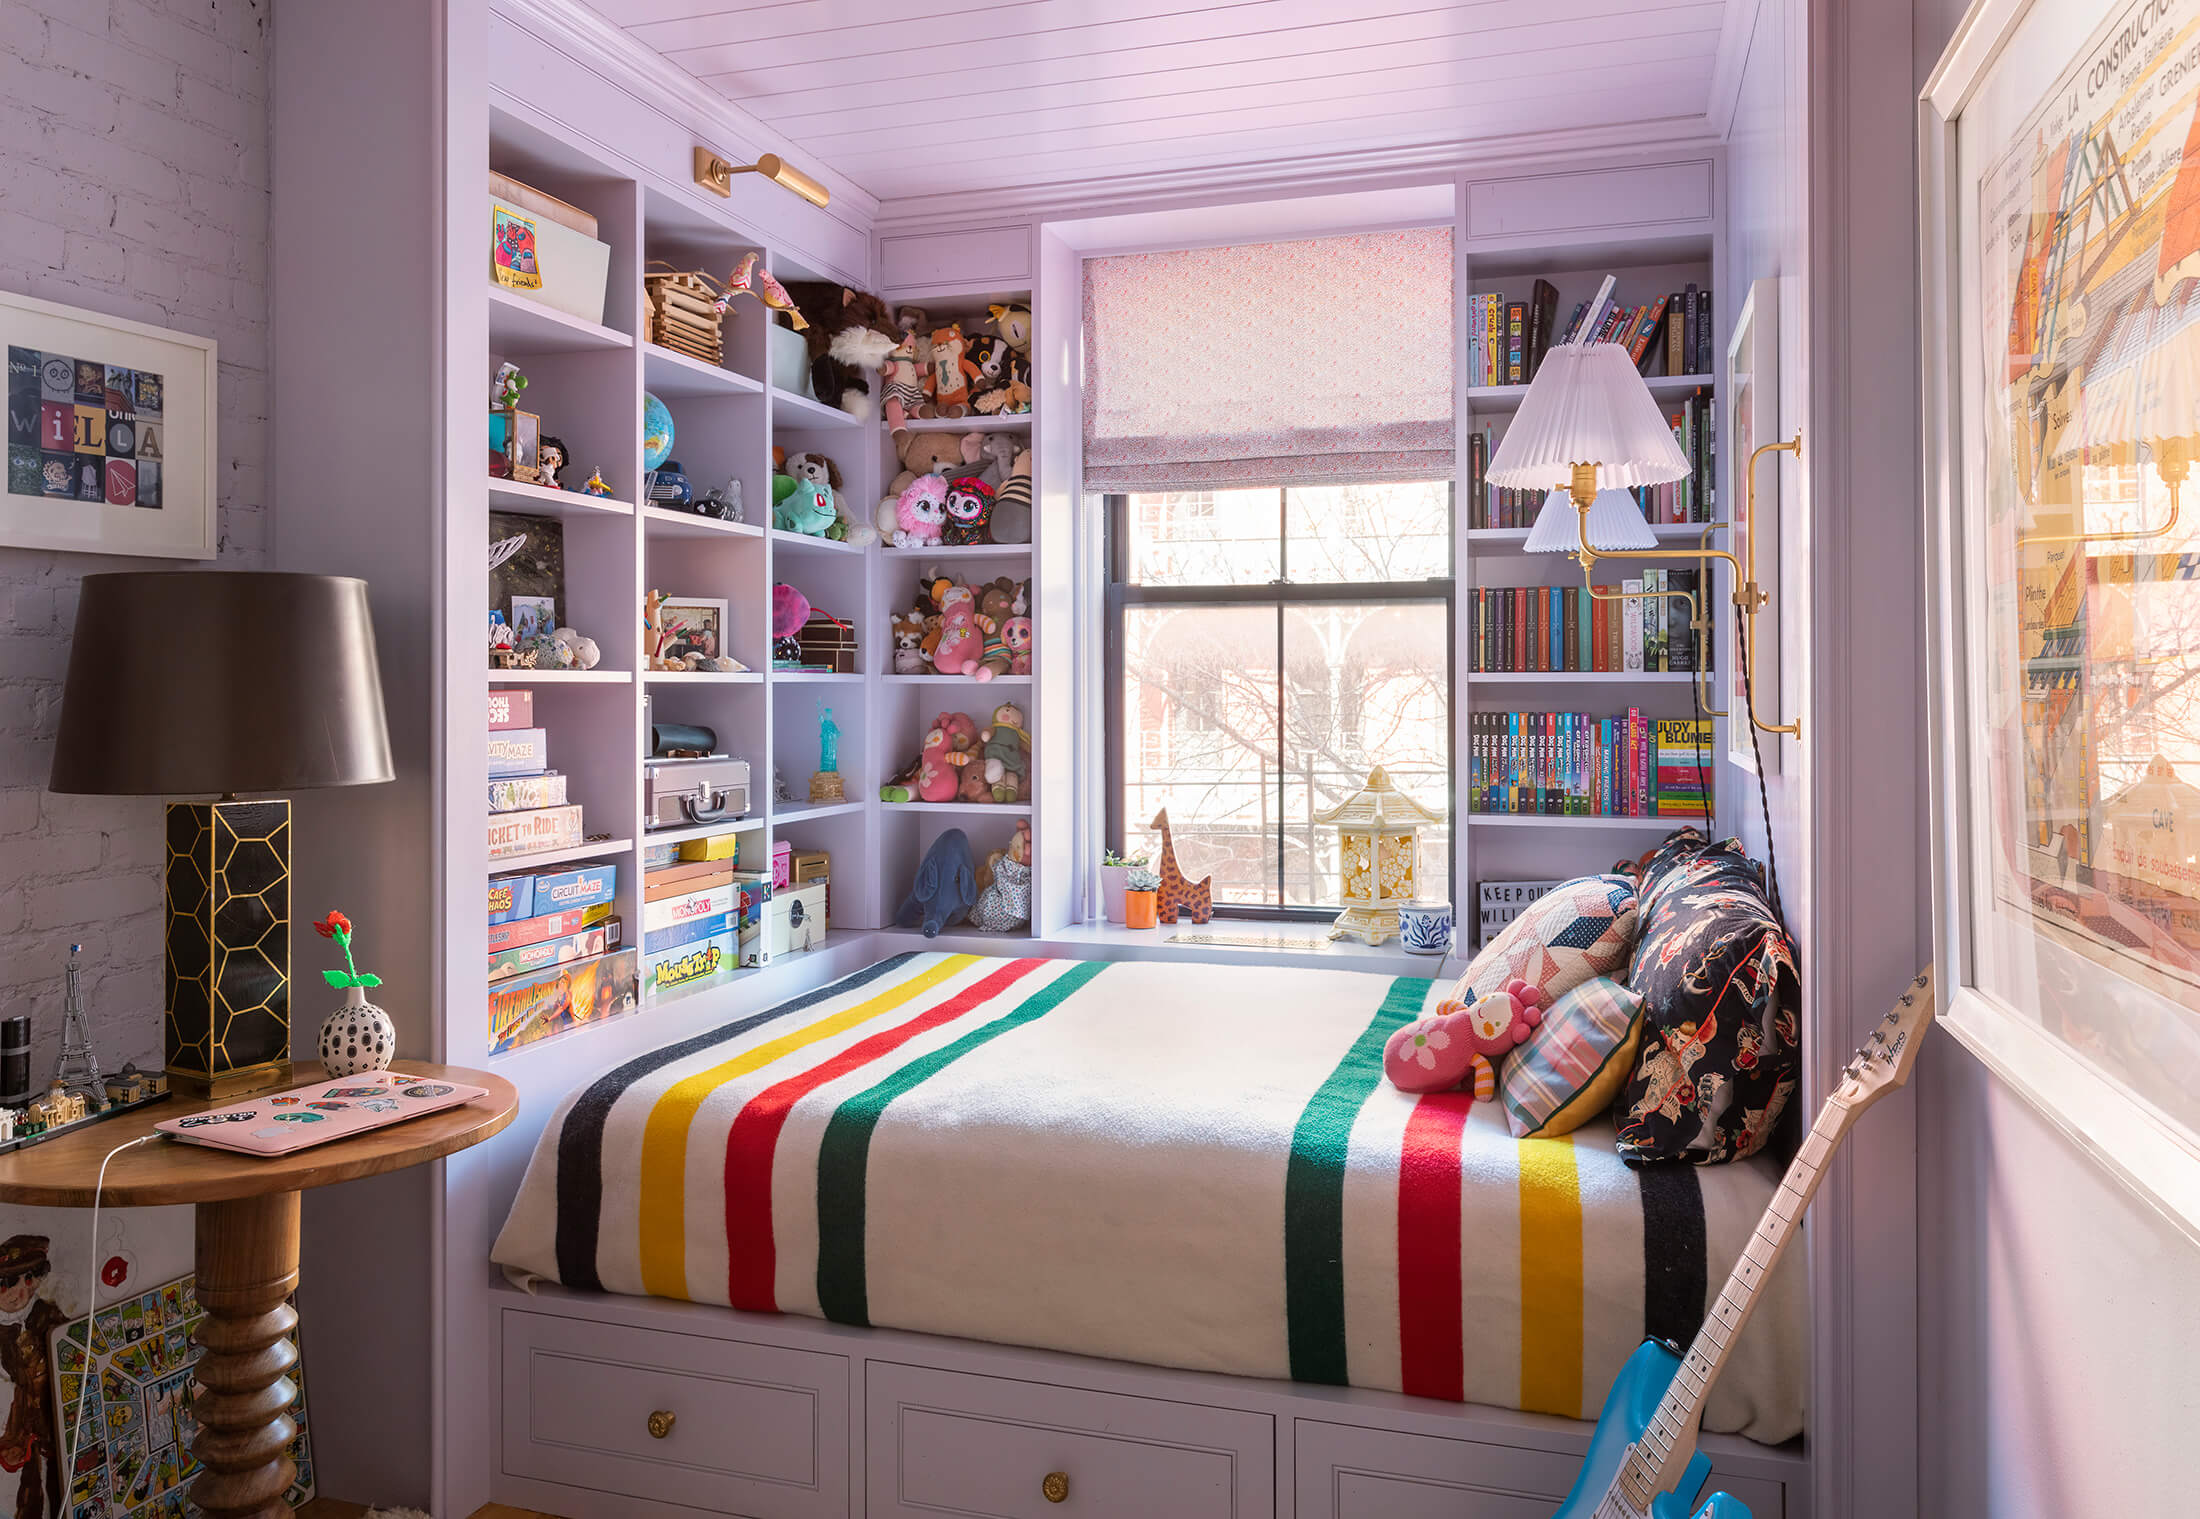 a bed built into an alcove with bookshelves